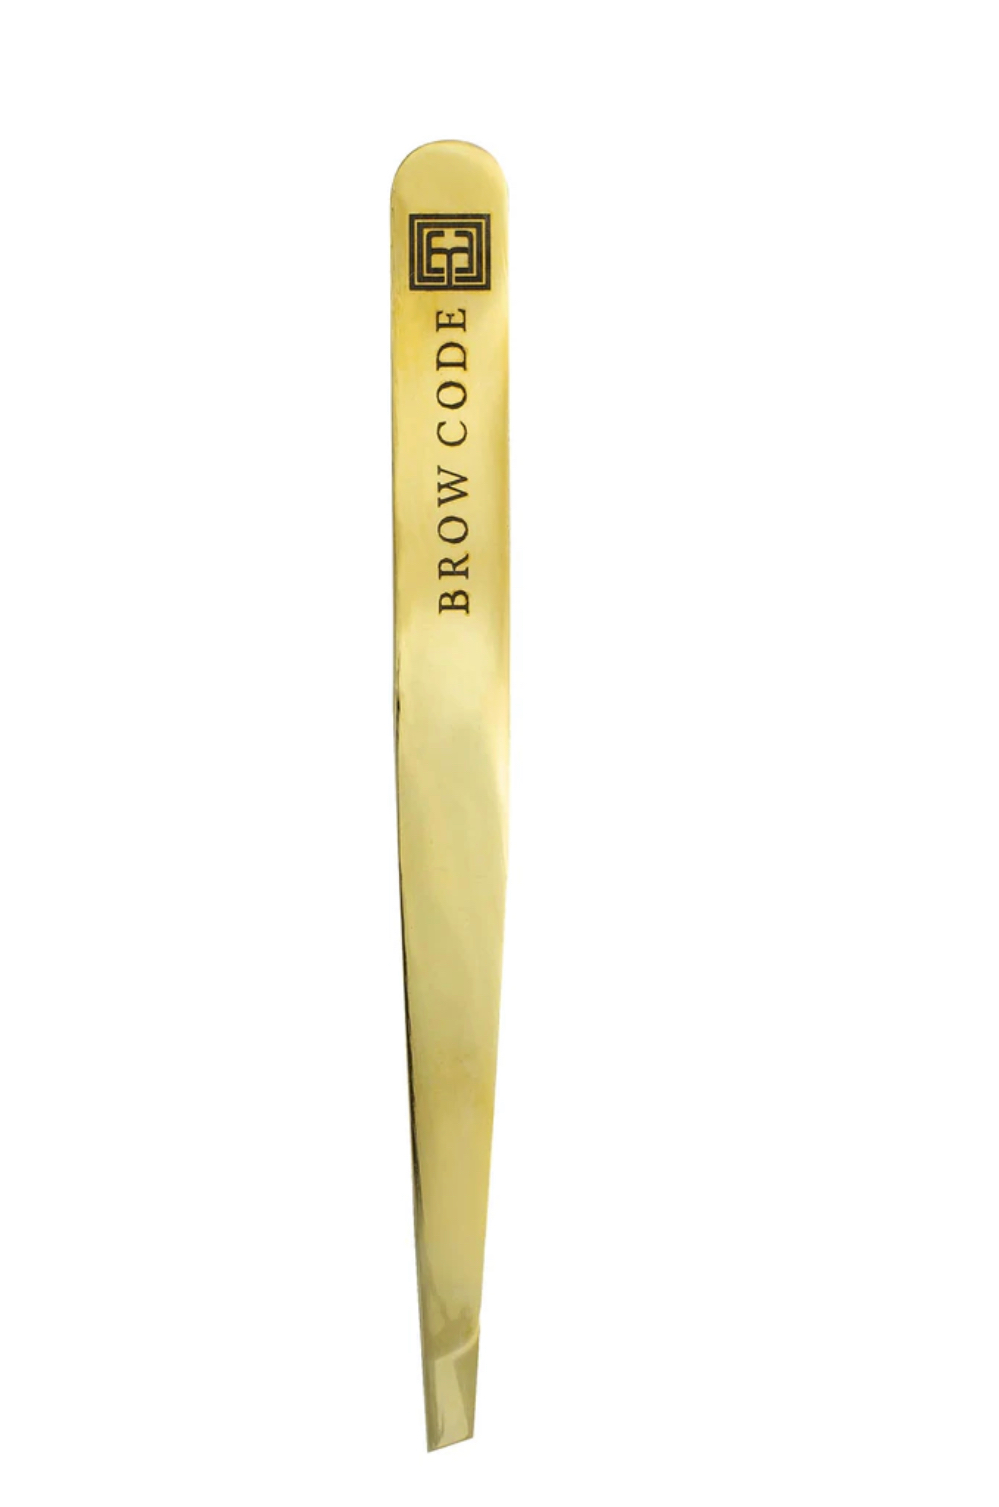 Brow Code has created the ideal tweezer range to make styling your brows easy. The Brow Code tweezers have been custom-made with Japanese non-magnetic stainless steel and a Titanium Plasma Gold Finish.